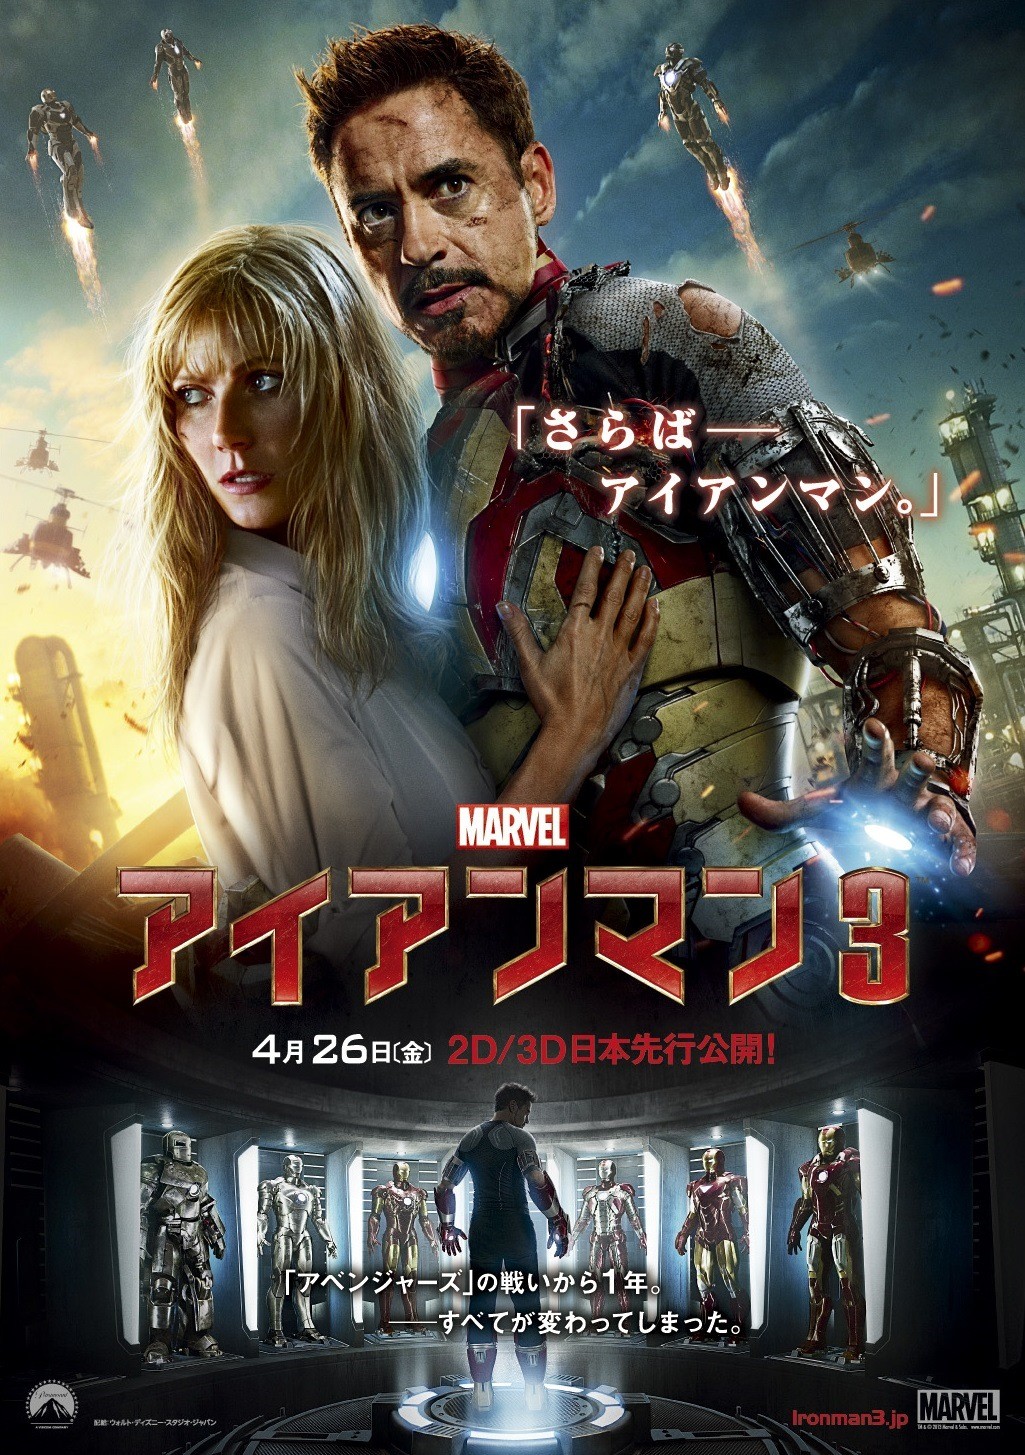 Extra Large Movie Poster Image for Iron Man 3 (#8 of 12)